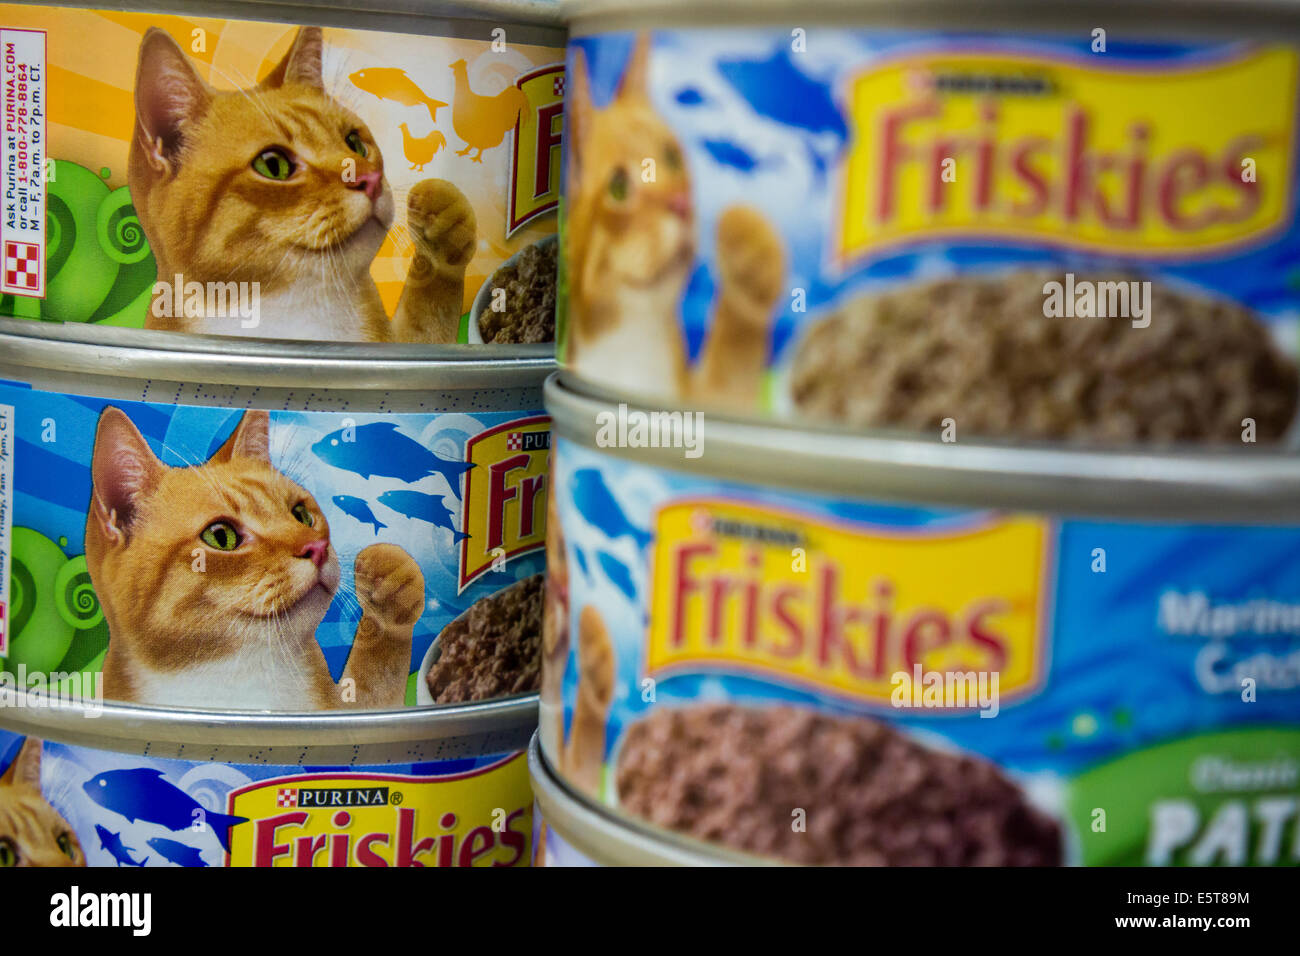 Cans of Friskies cat food in an assortment of yummy flavors on a